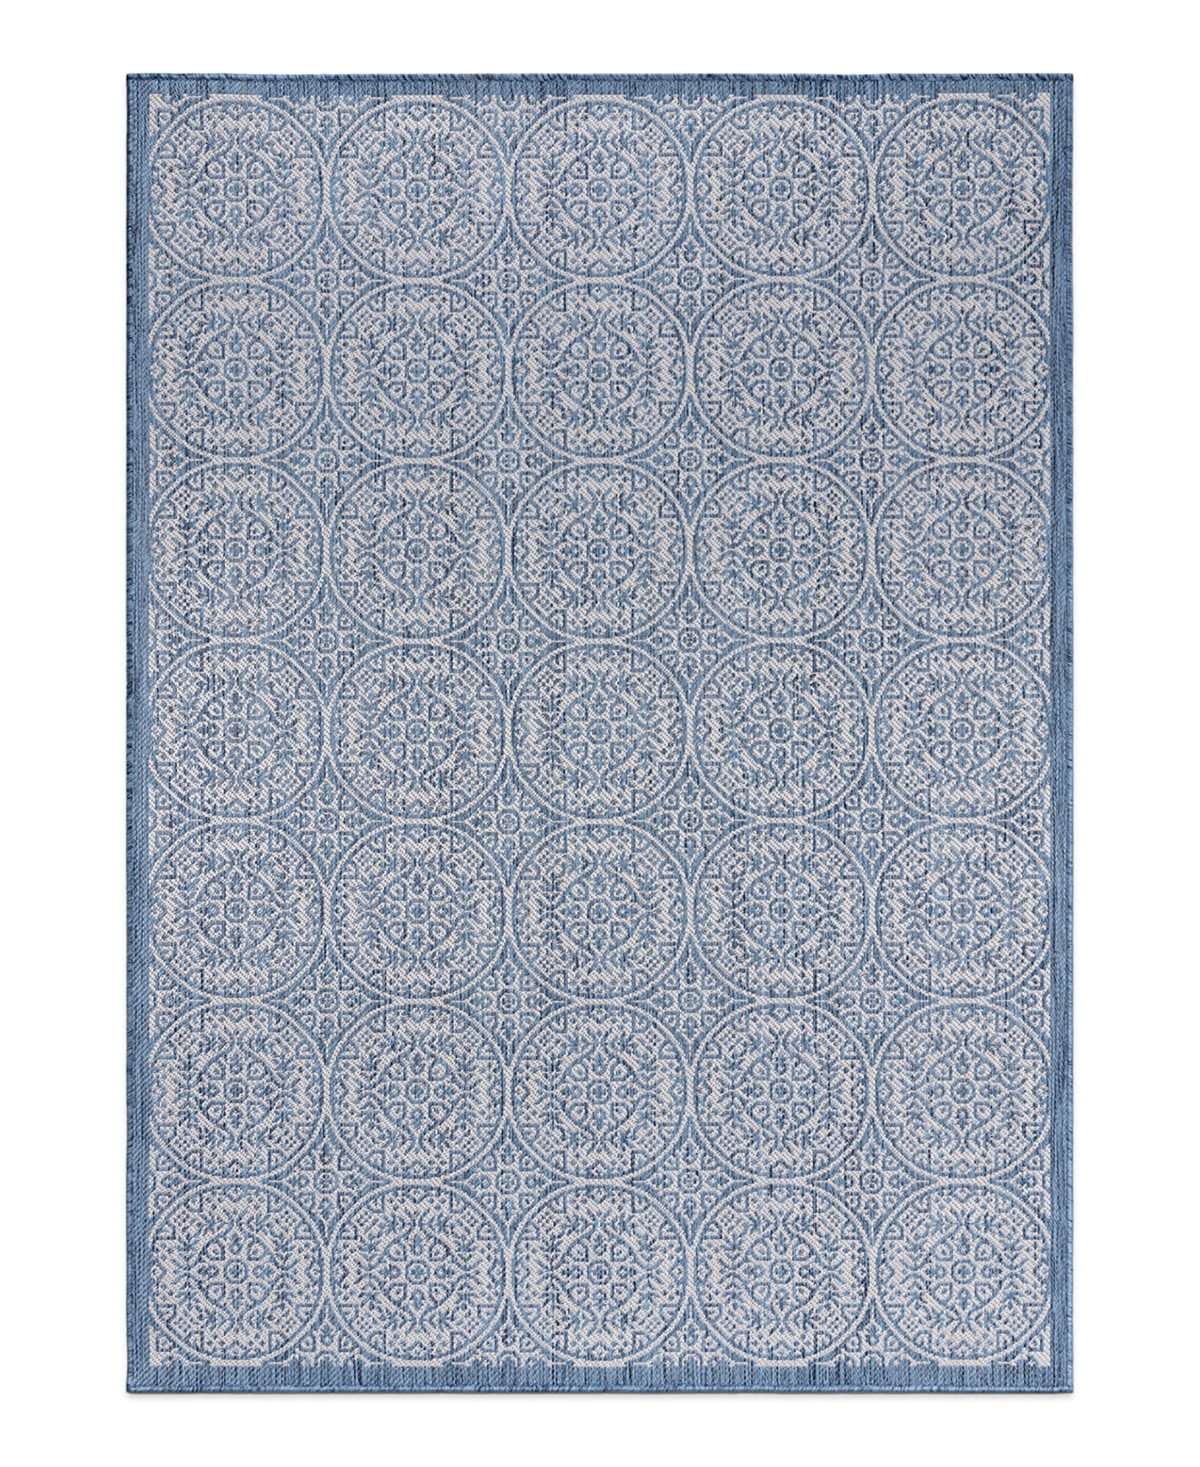 Main Street Rugs Bays Outdoor 121 5' X 7' Area Rug In Blue